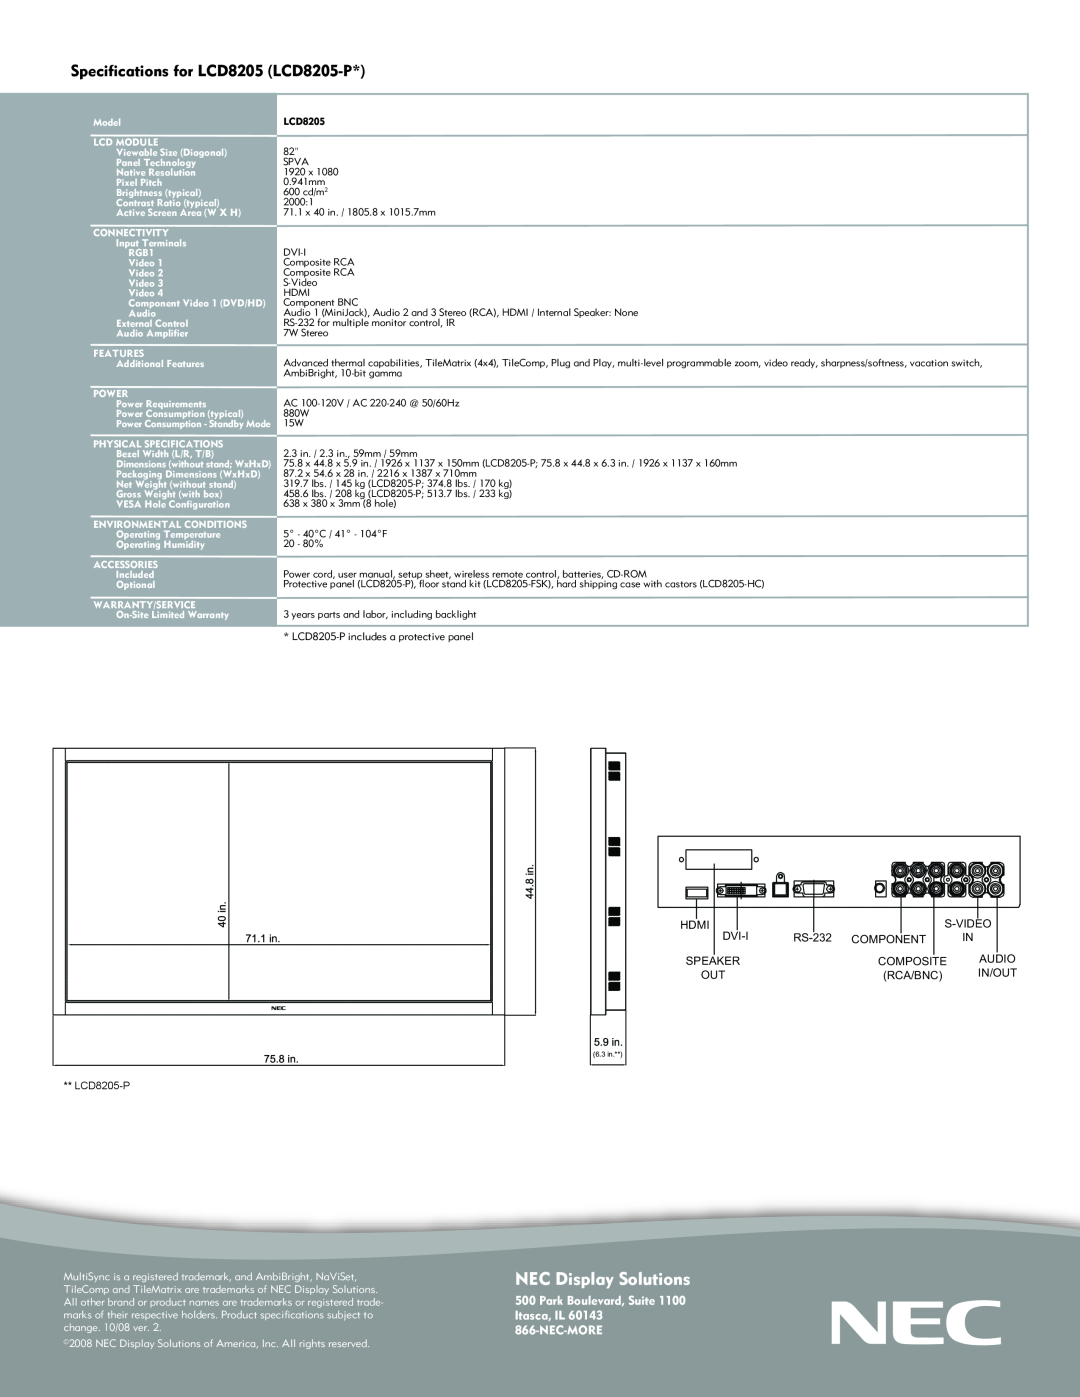 NEC manual NEC Display Solutions, Specifications for LCD8205 LCD8205-P, Park Boulevard, Suite Itasca, IL 866-NEC-MORE 